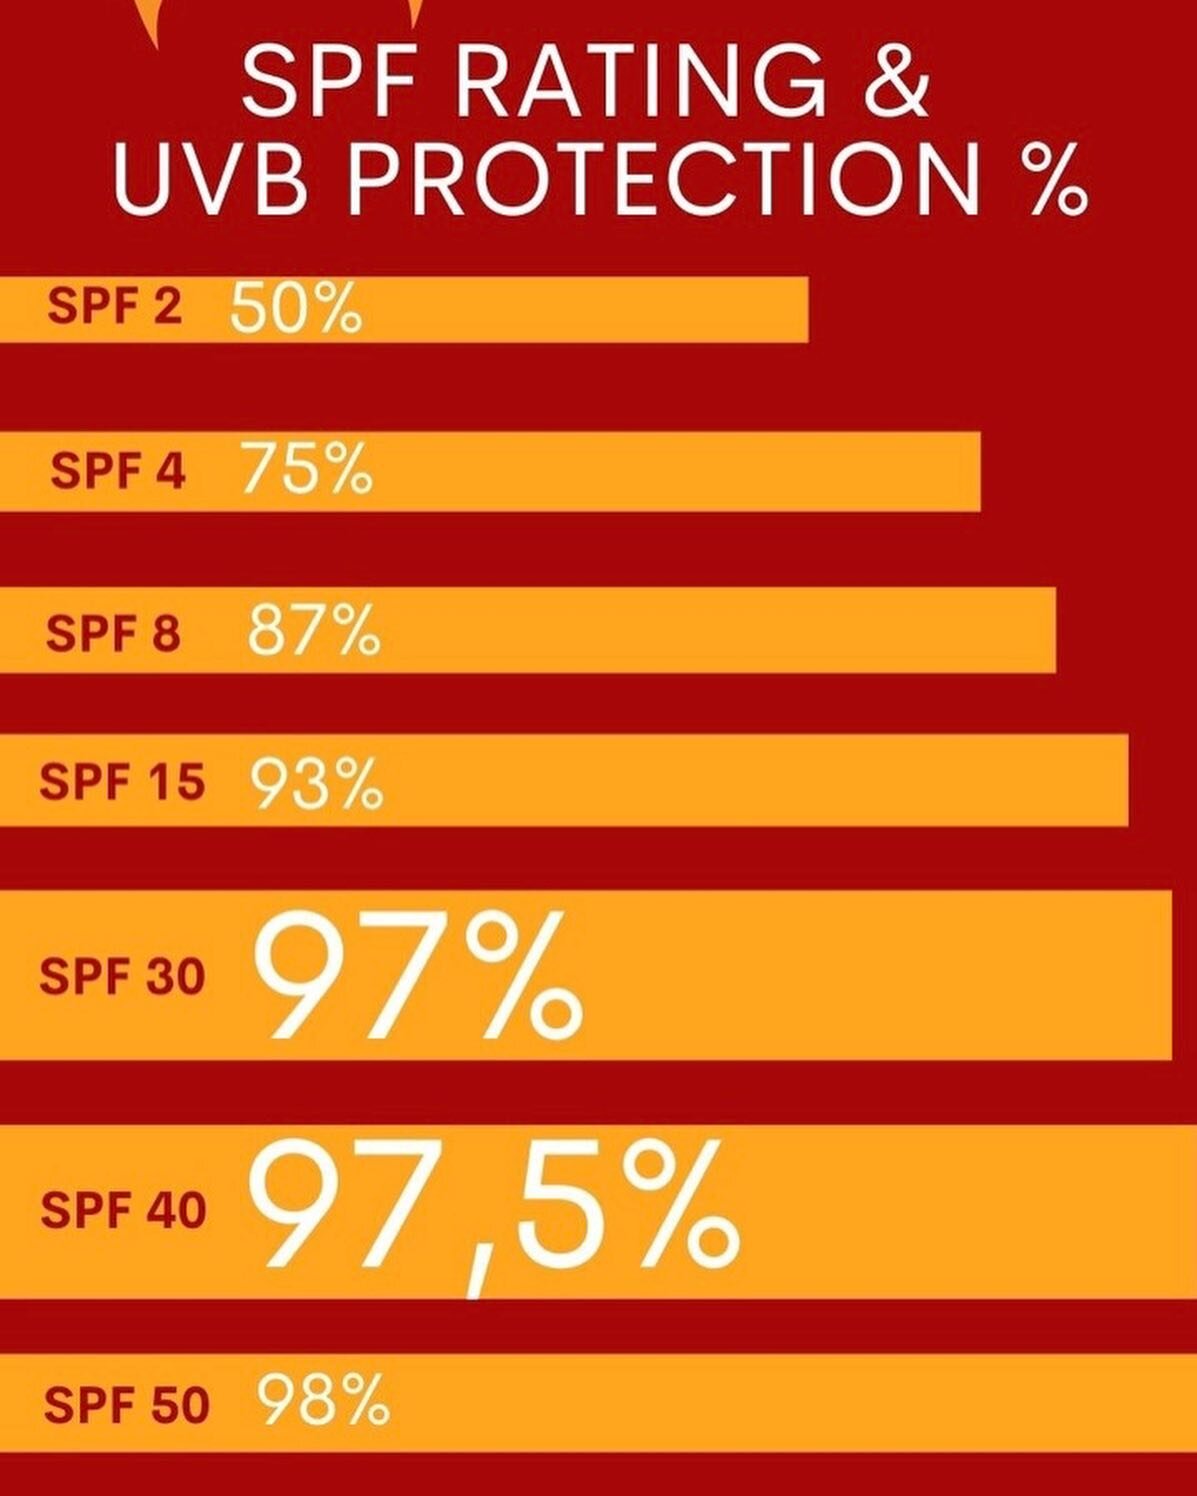 Differences in SPF creams on UVB light protection. UVA light can be protected by only if creams are labeled &ldquo;Broad Spectum&rdquo;.
.
.

#agelessbyabovian #bodycare #skinhealth